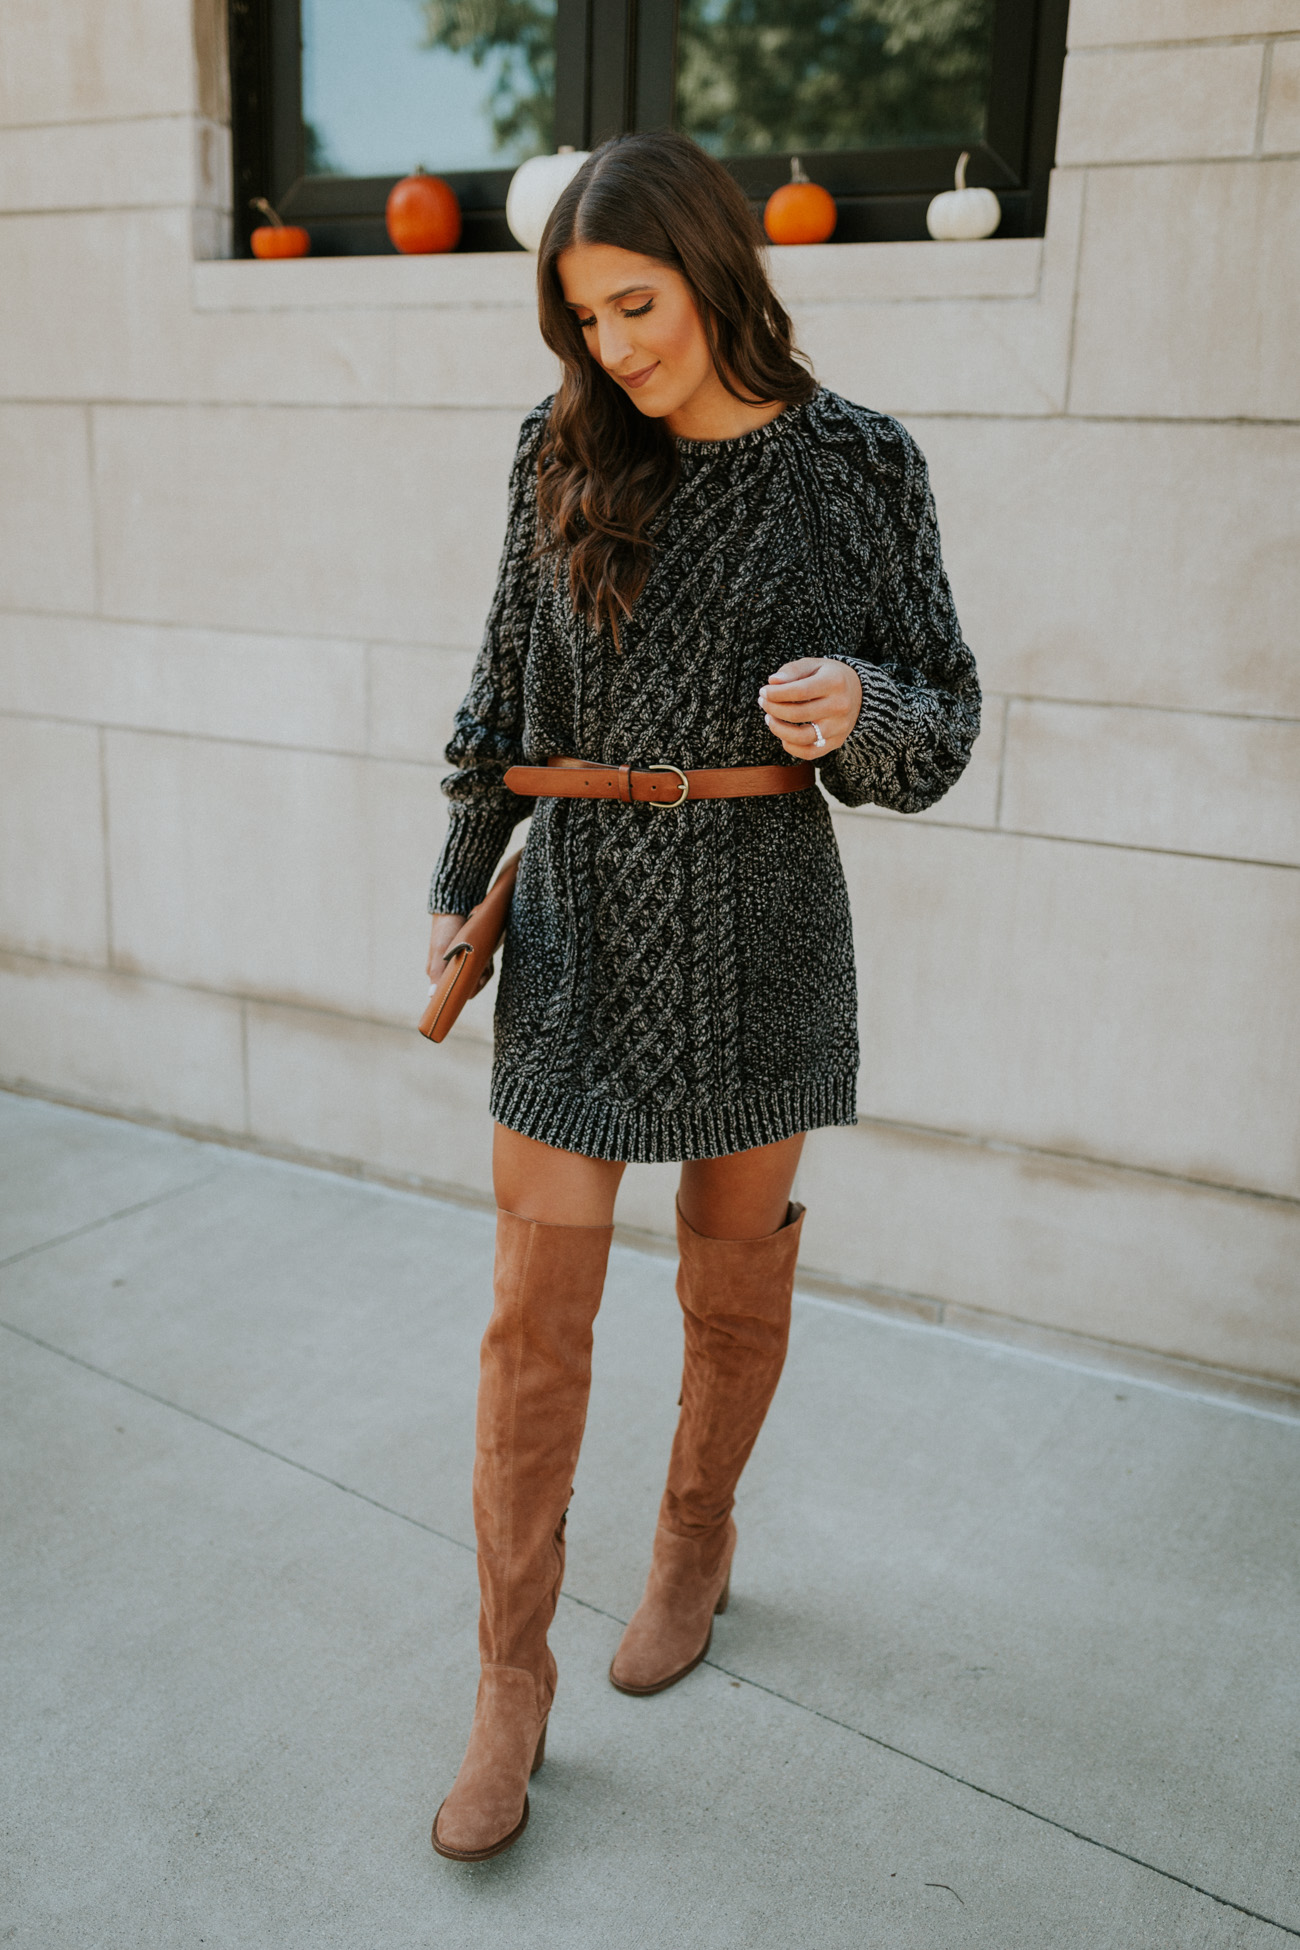 Comfy Sweater Dress With Boots Outfits How To Dress Like a Supermodel Off-D...